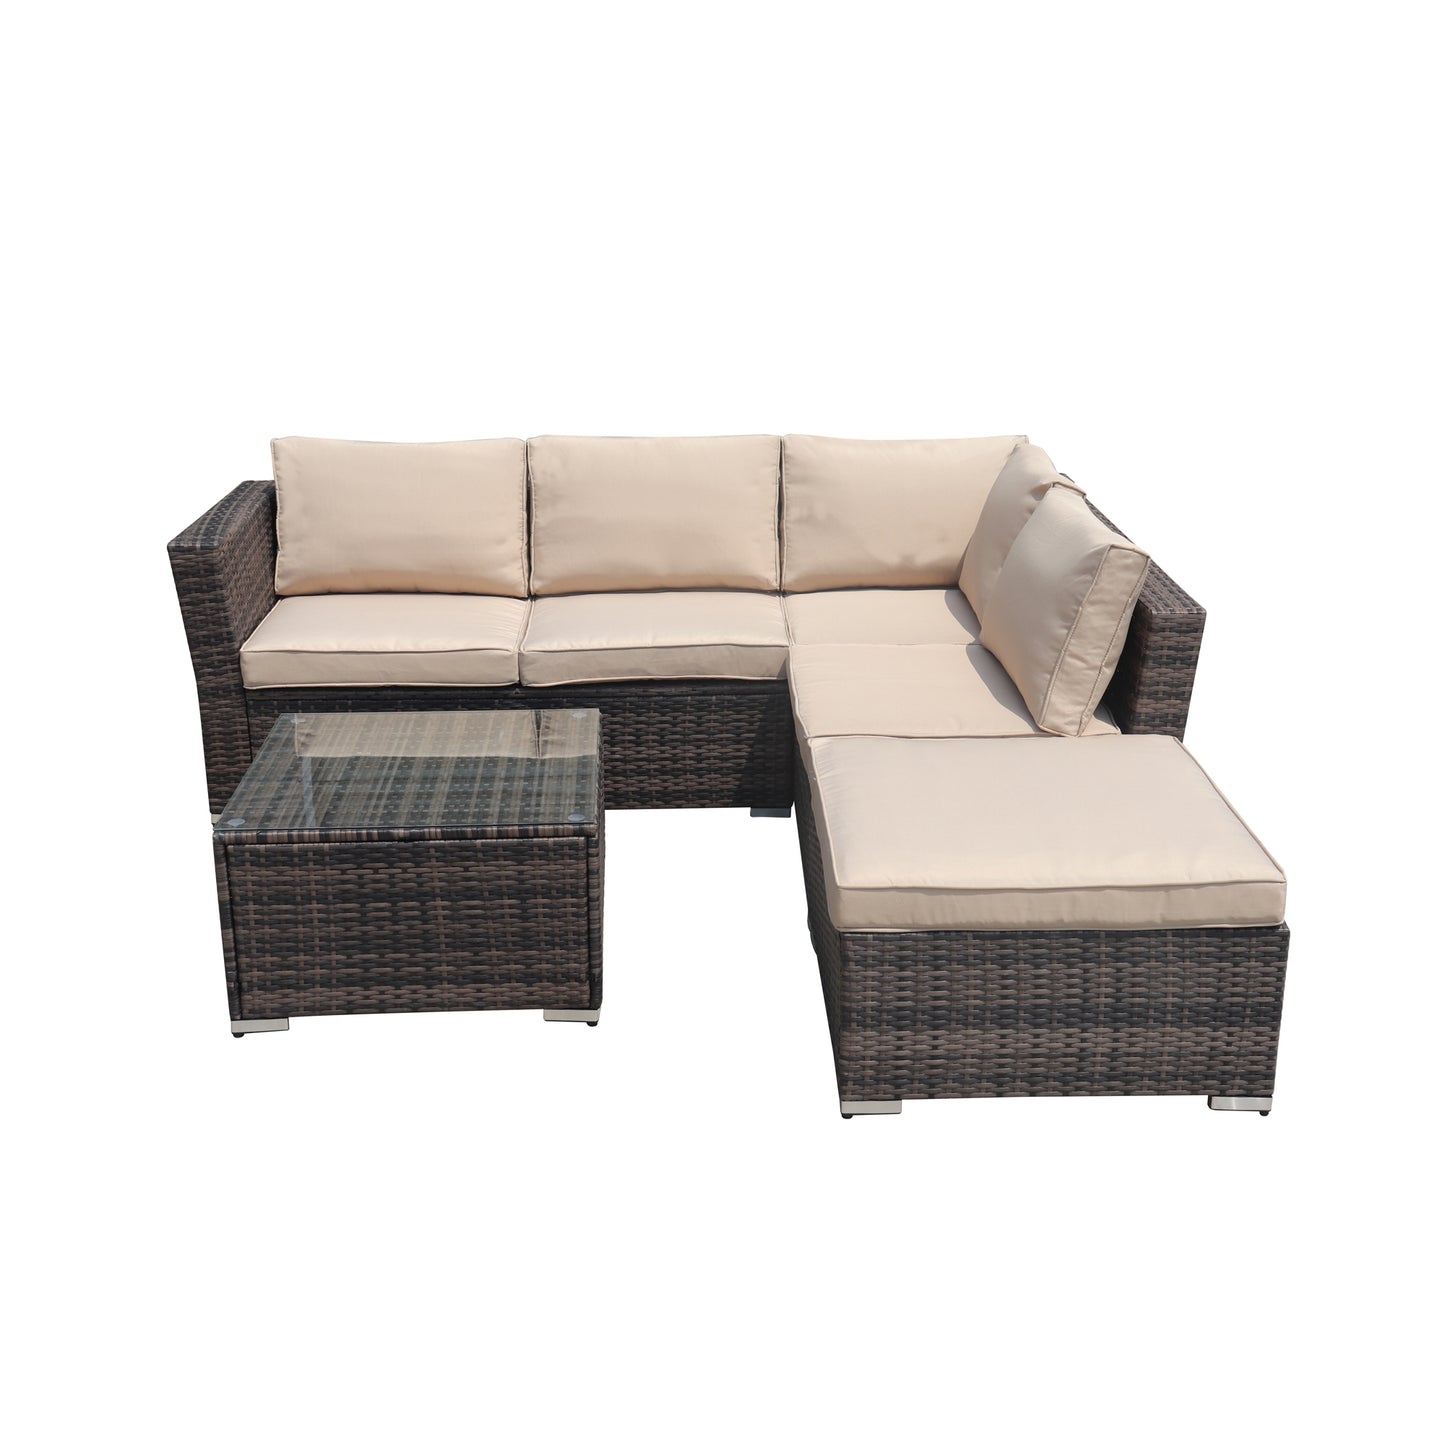 4-Piece Patio Wicker Furniture Set Outdoor Rattan Sectional Sofa, All-Weather Brown Wicker Rattan Chair with Tempered Glass Table